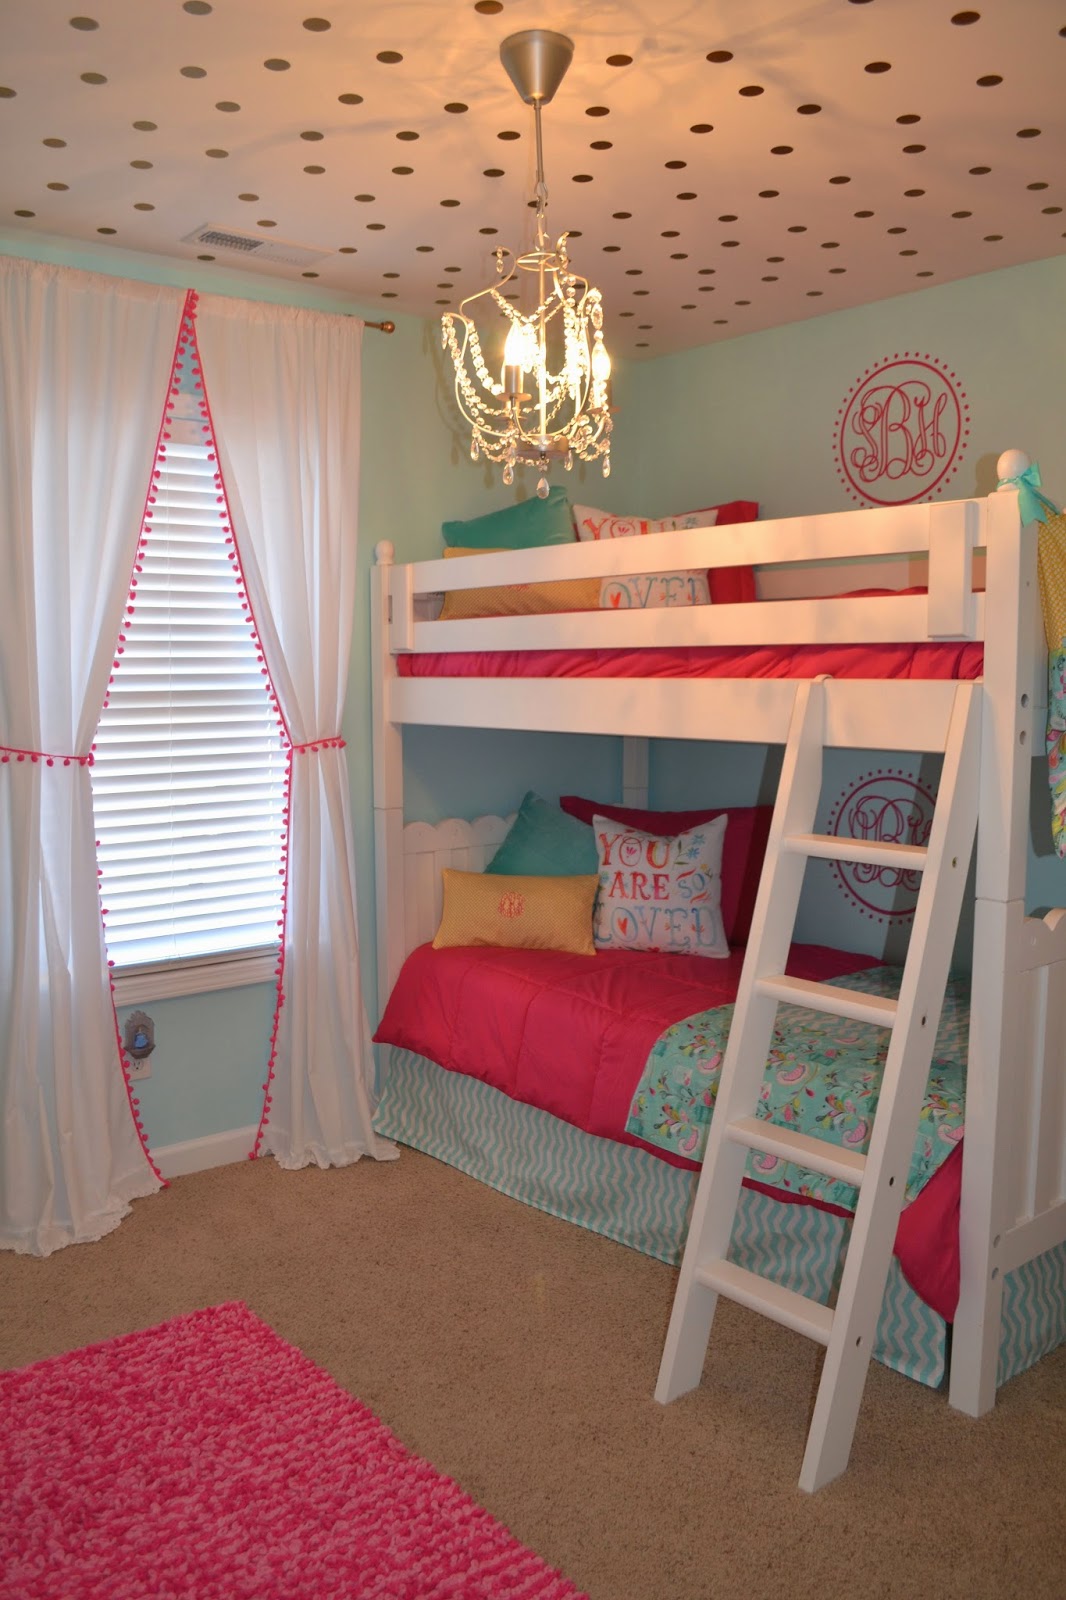 Beyond Our Wildest Dreams: The Girls New Room